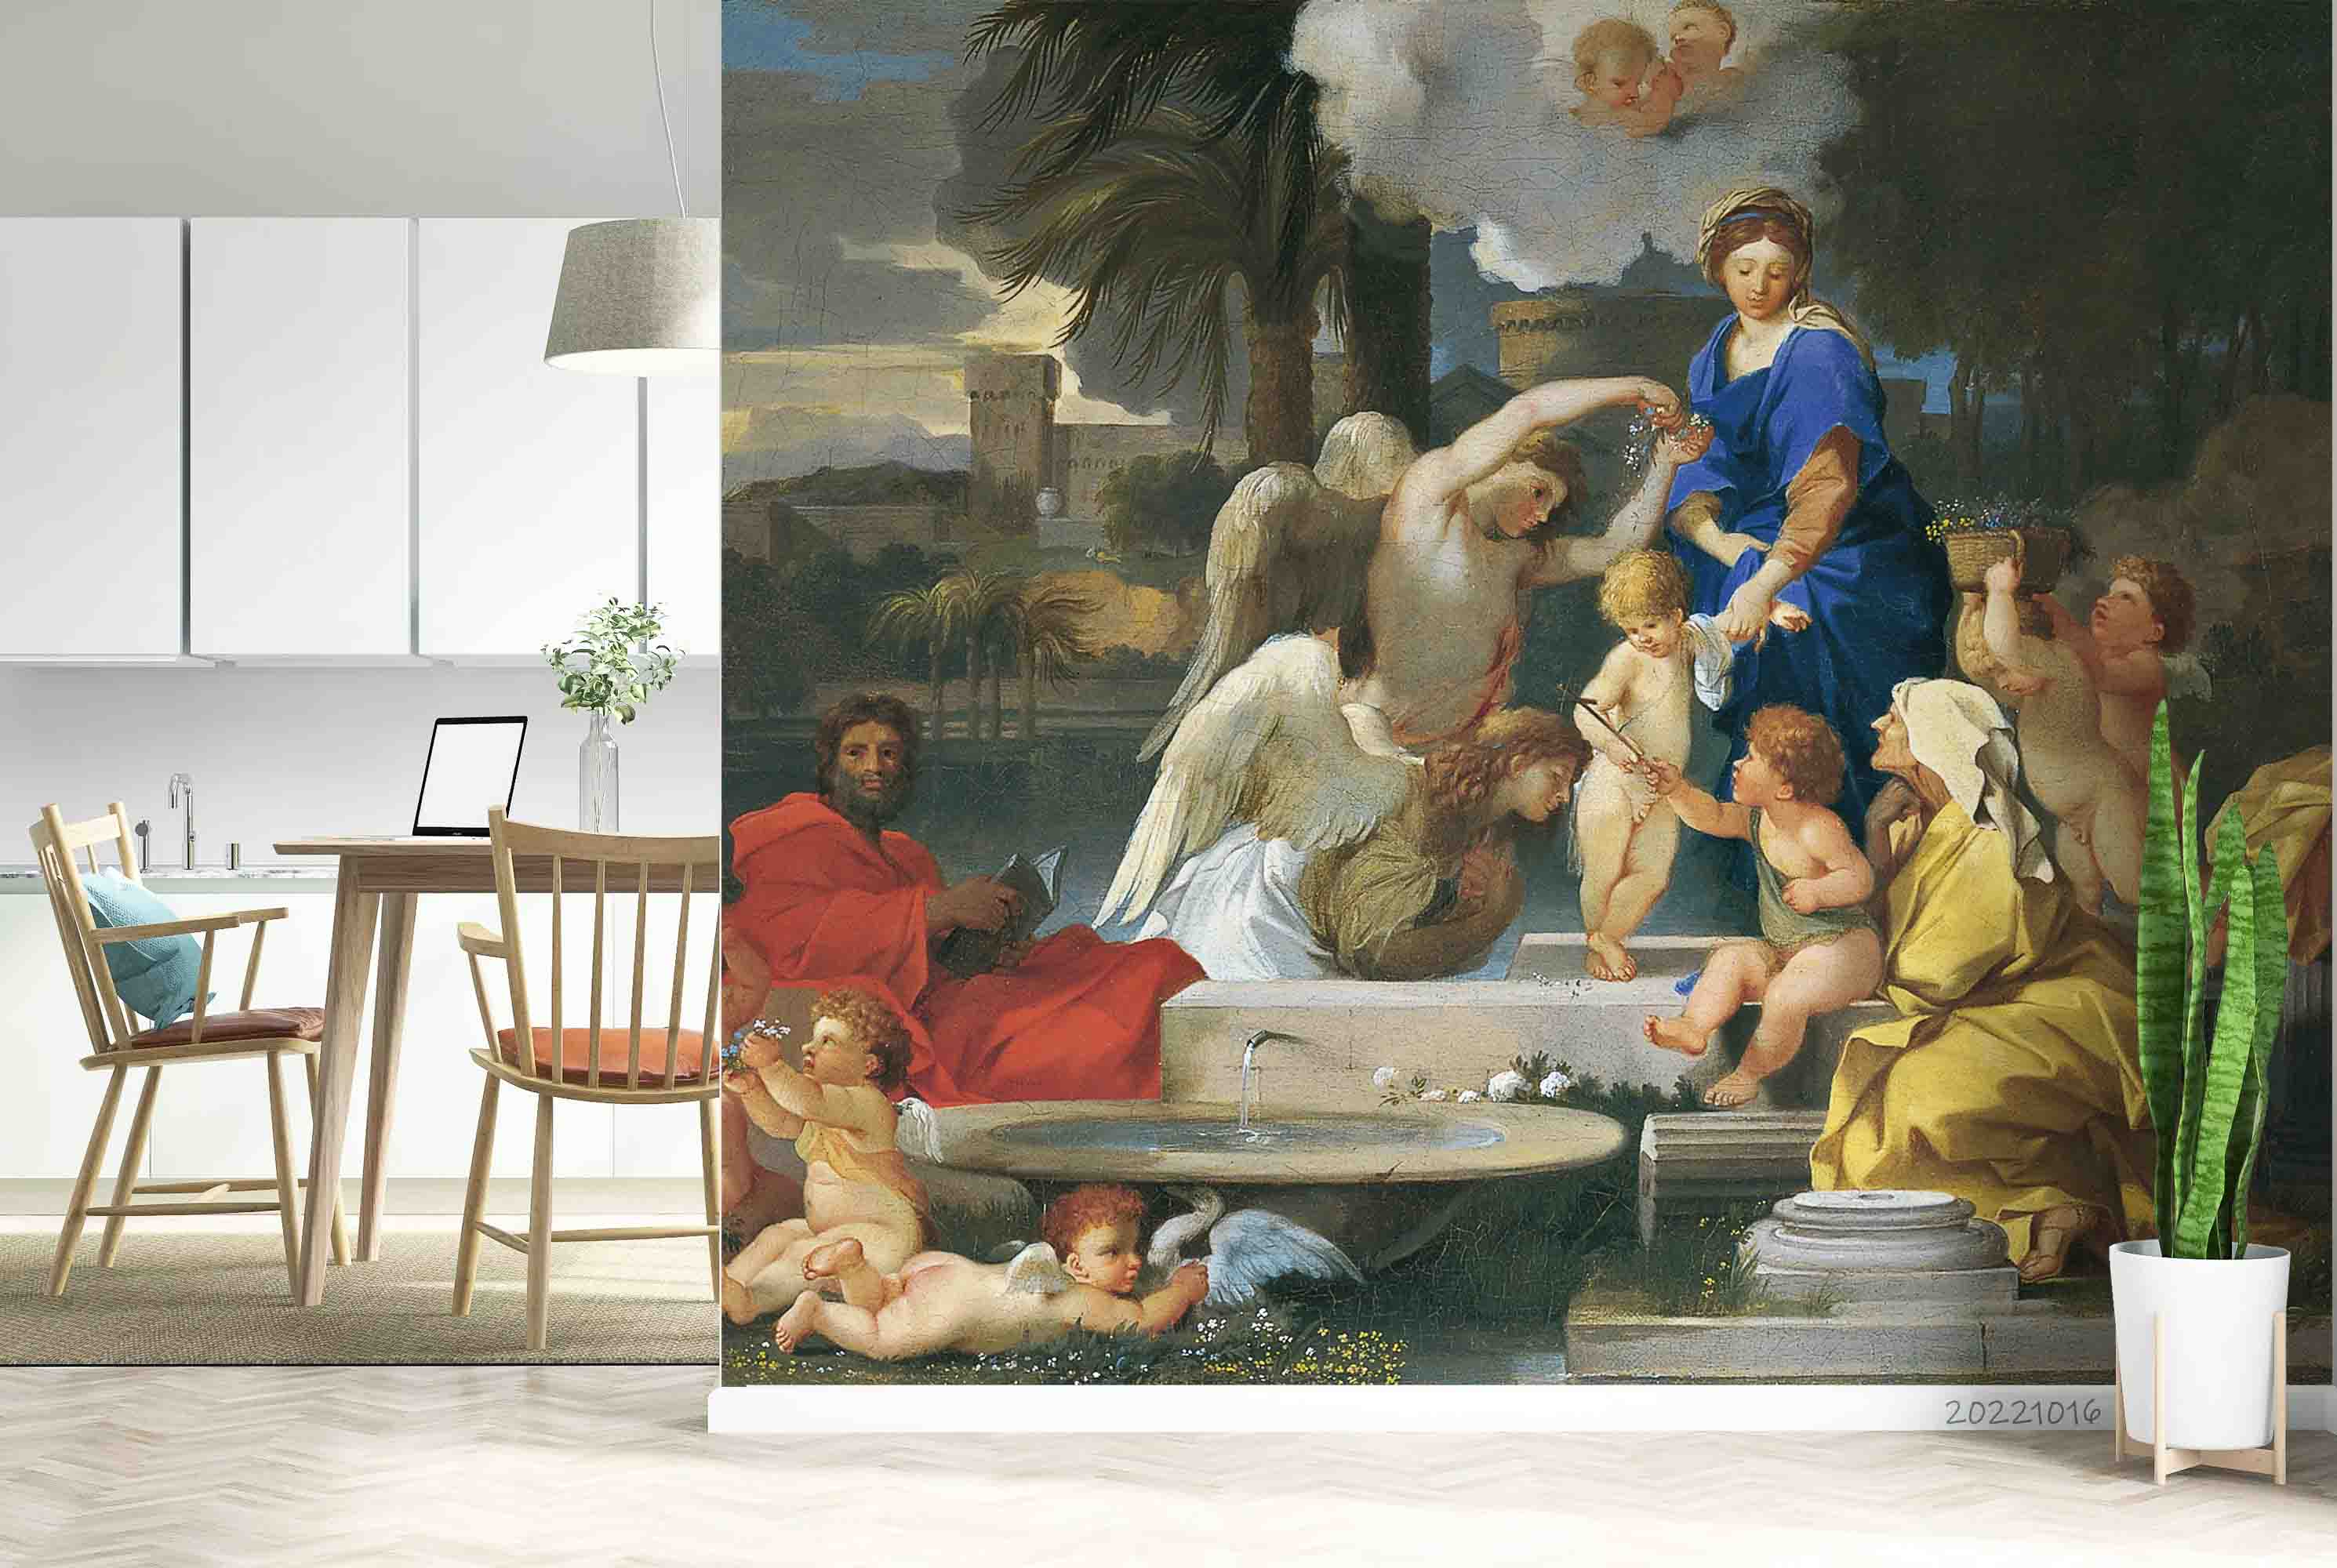 3D Vintage Europe Religious Oil Painting Wall Mural Wallpaper GD 2979- Jess Art Decoration